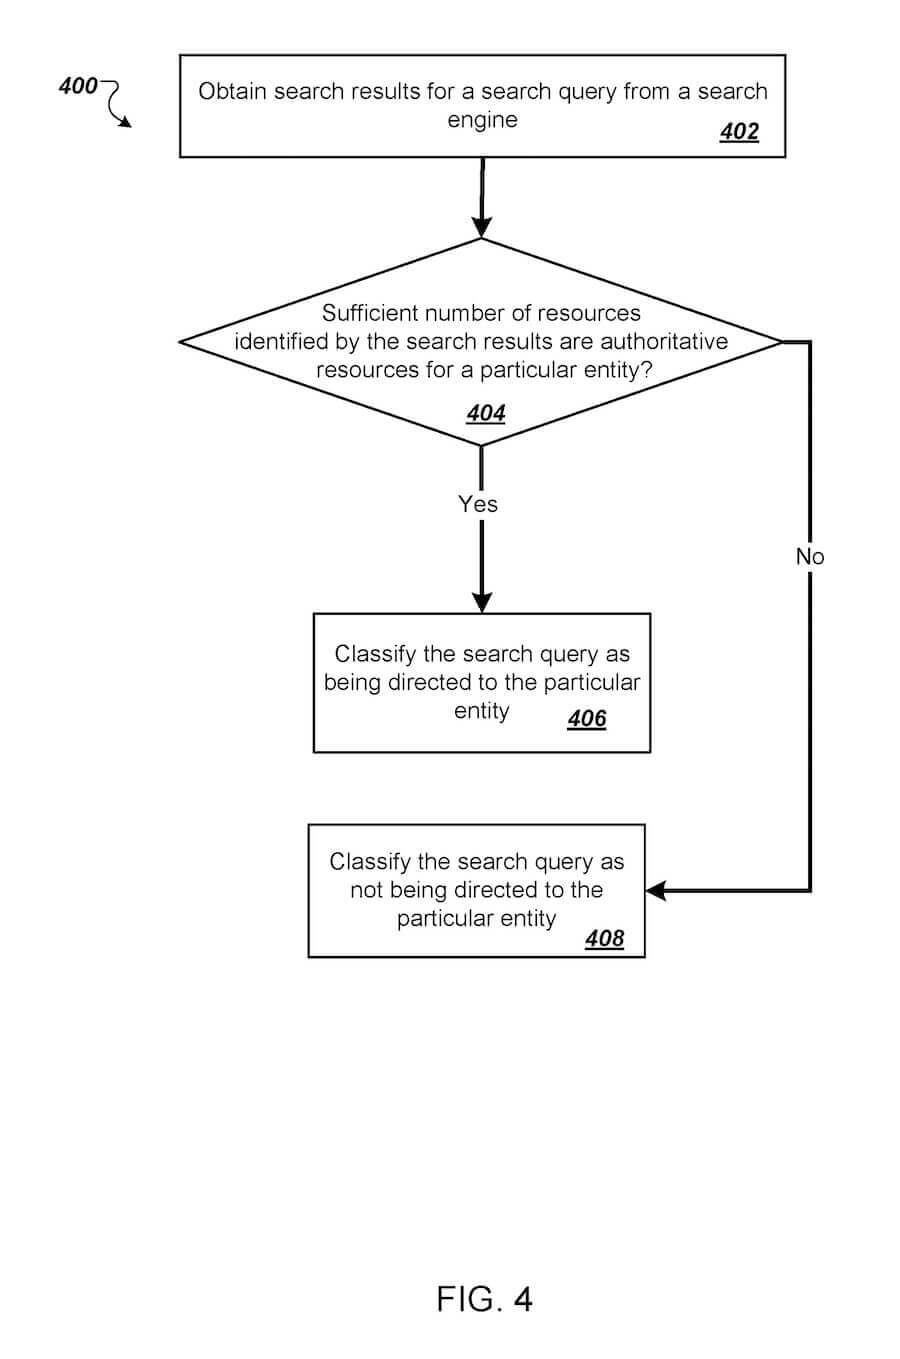 Entity SEO Diagram from Google Patent